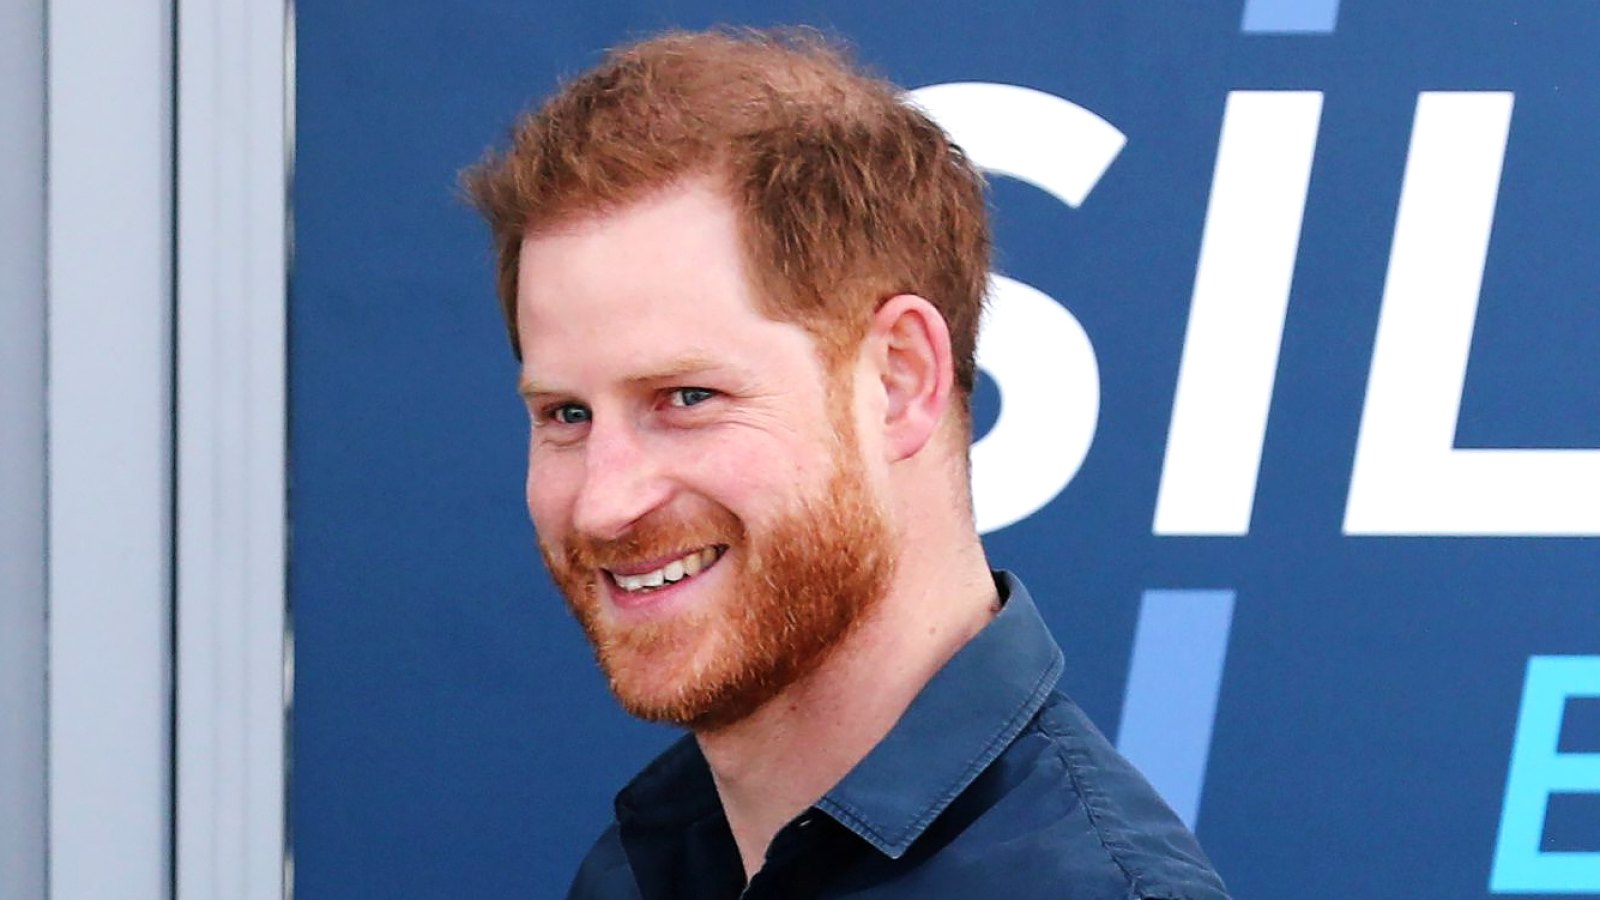 Prince Harry Shares Inspiring Message for Young People Amid the Coronavirus Pandemic